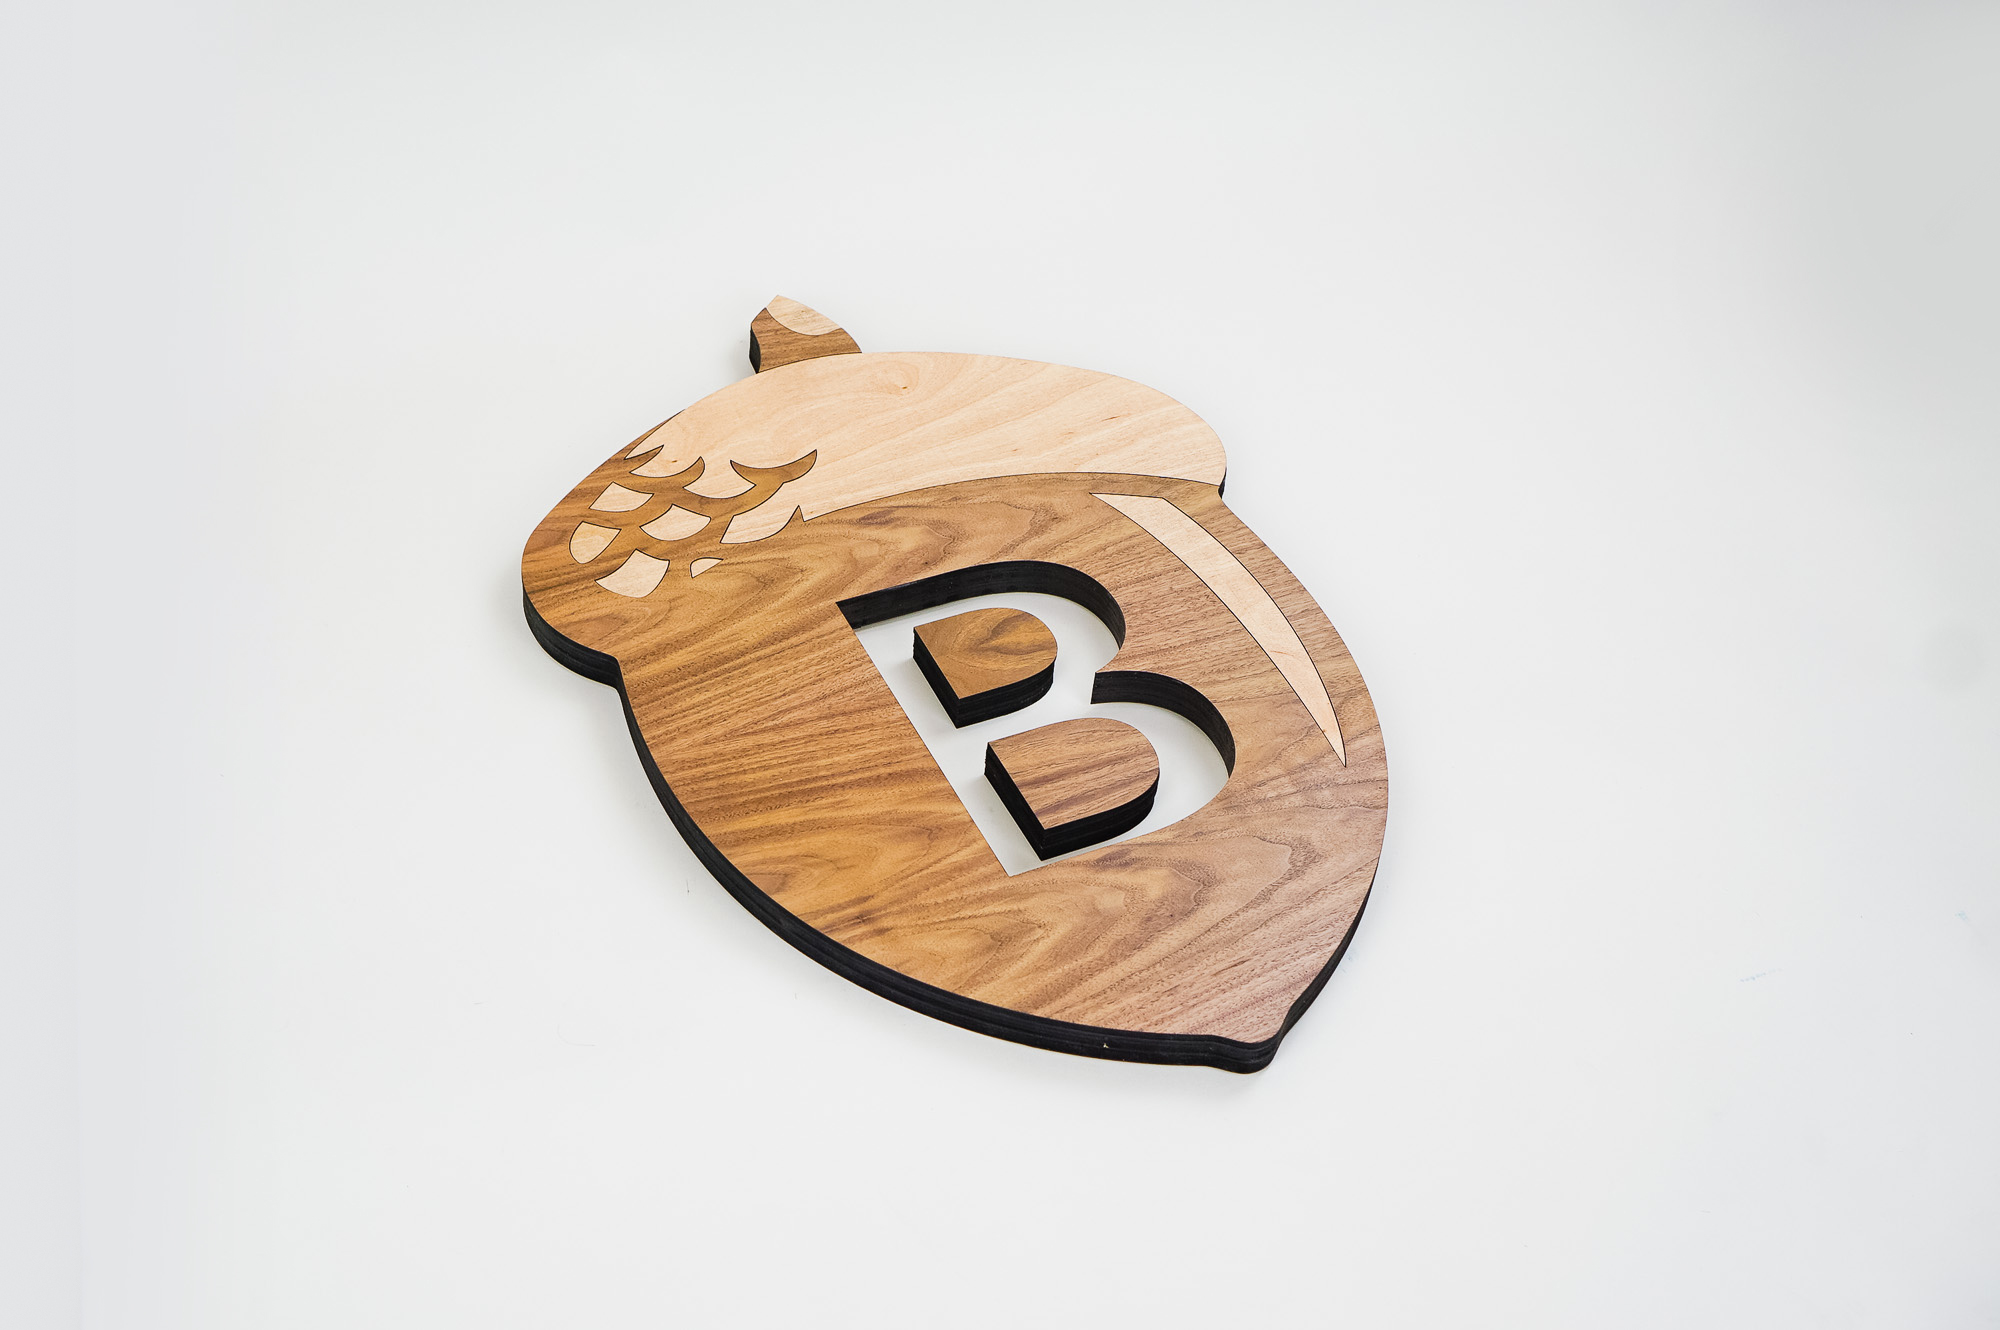 Wood sign for Beneficial State Bank, an Oakland, California-based community development bank.